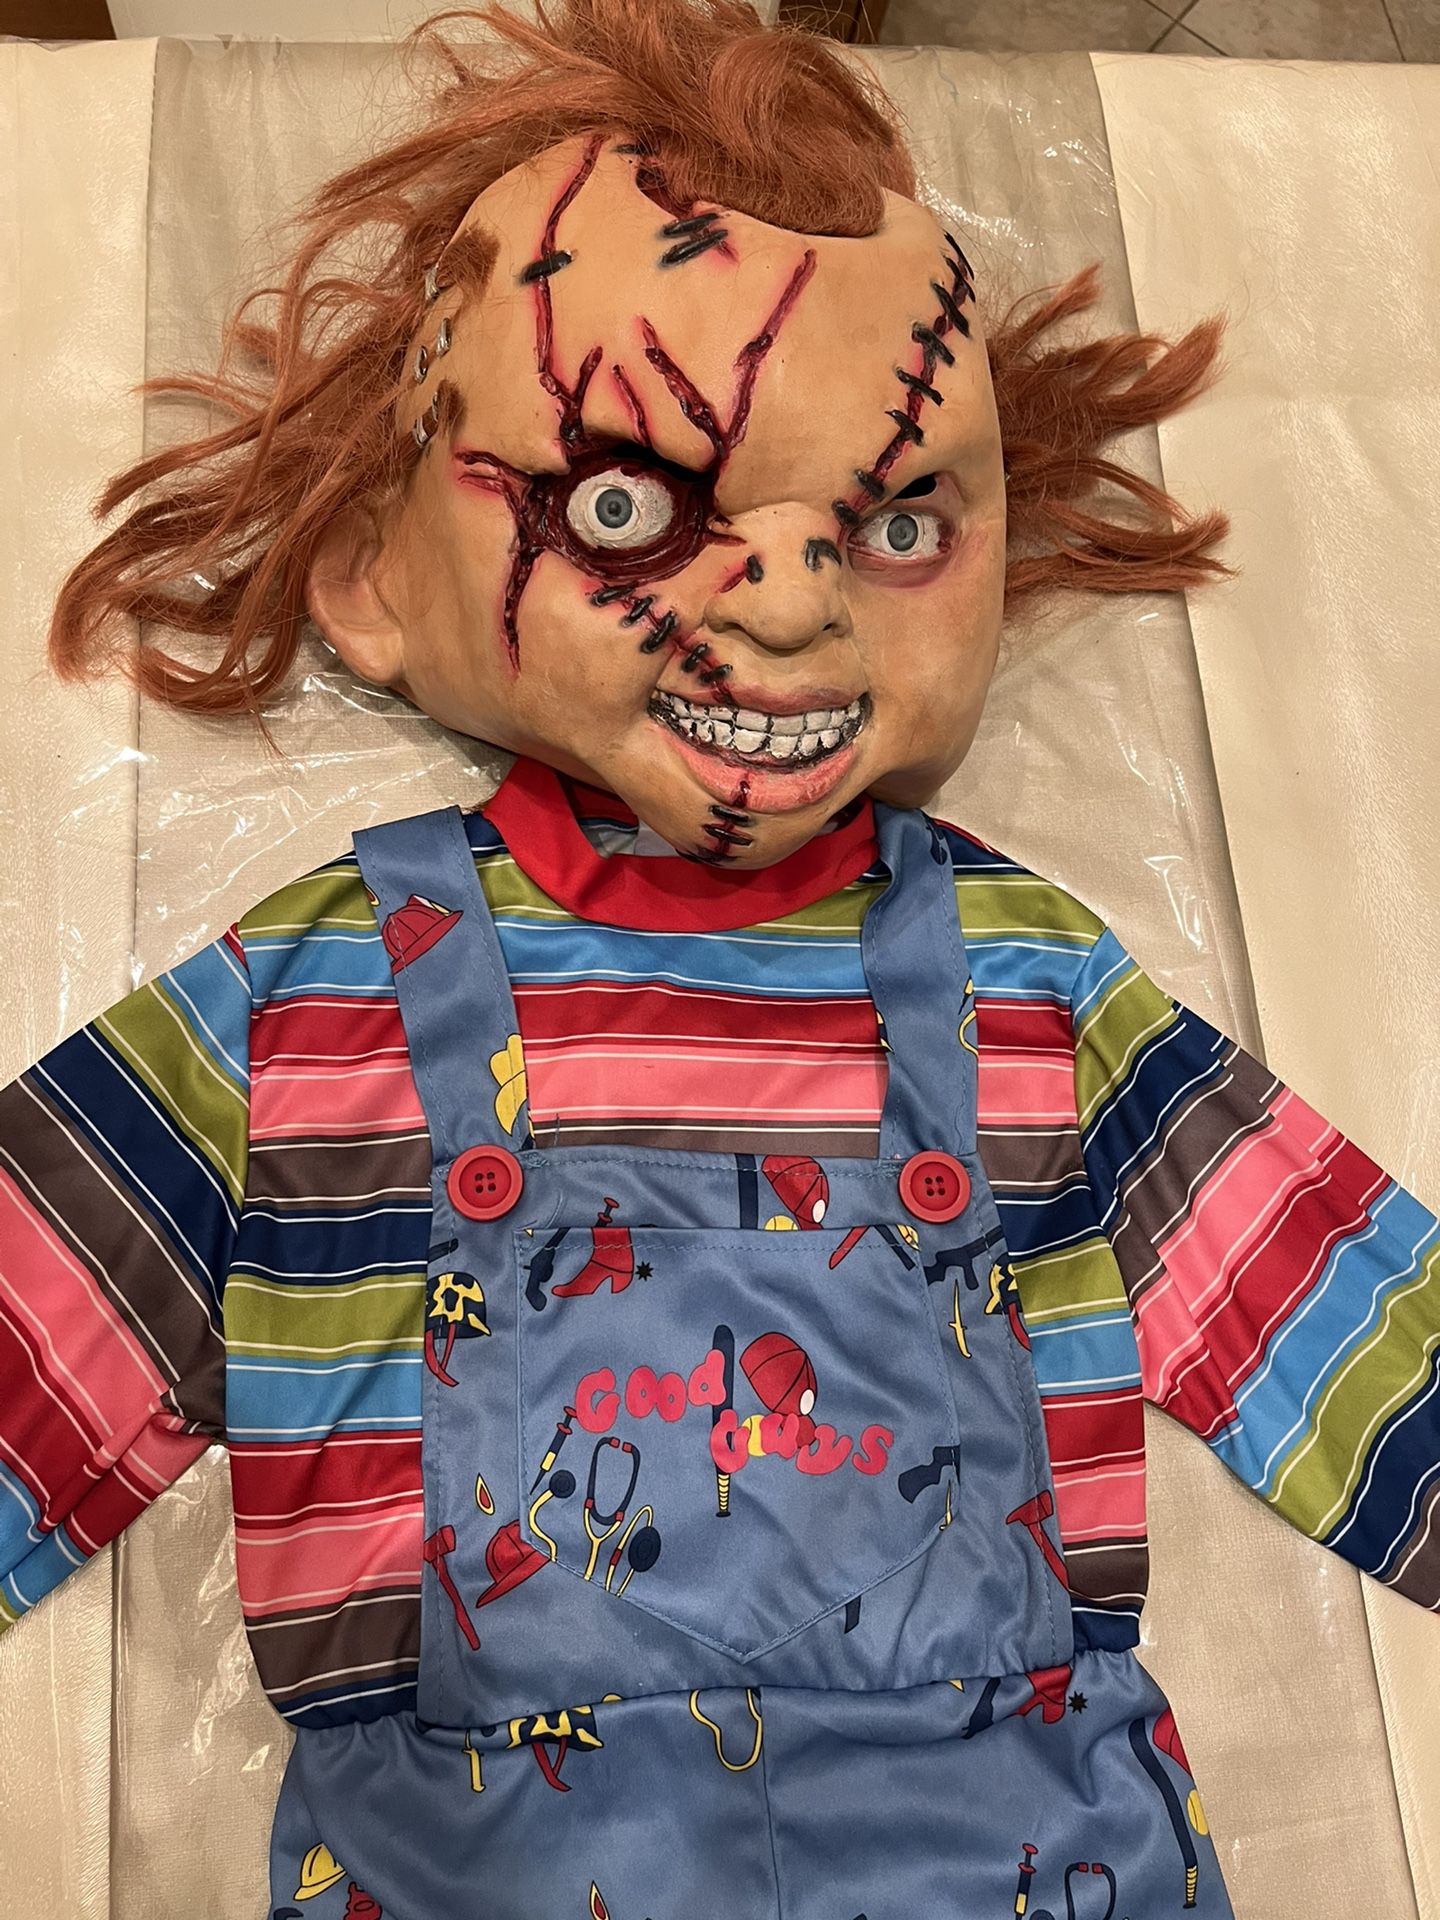 Child’s Play Chucky Doll Deluxe Movie Costume Scary Good Guys Overalls plus Head Face Mask Wig Child Size 7 